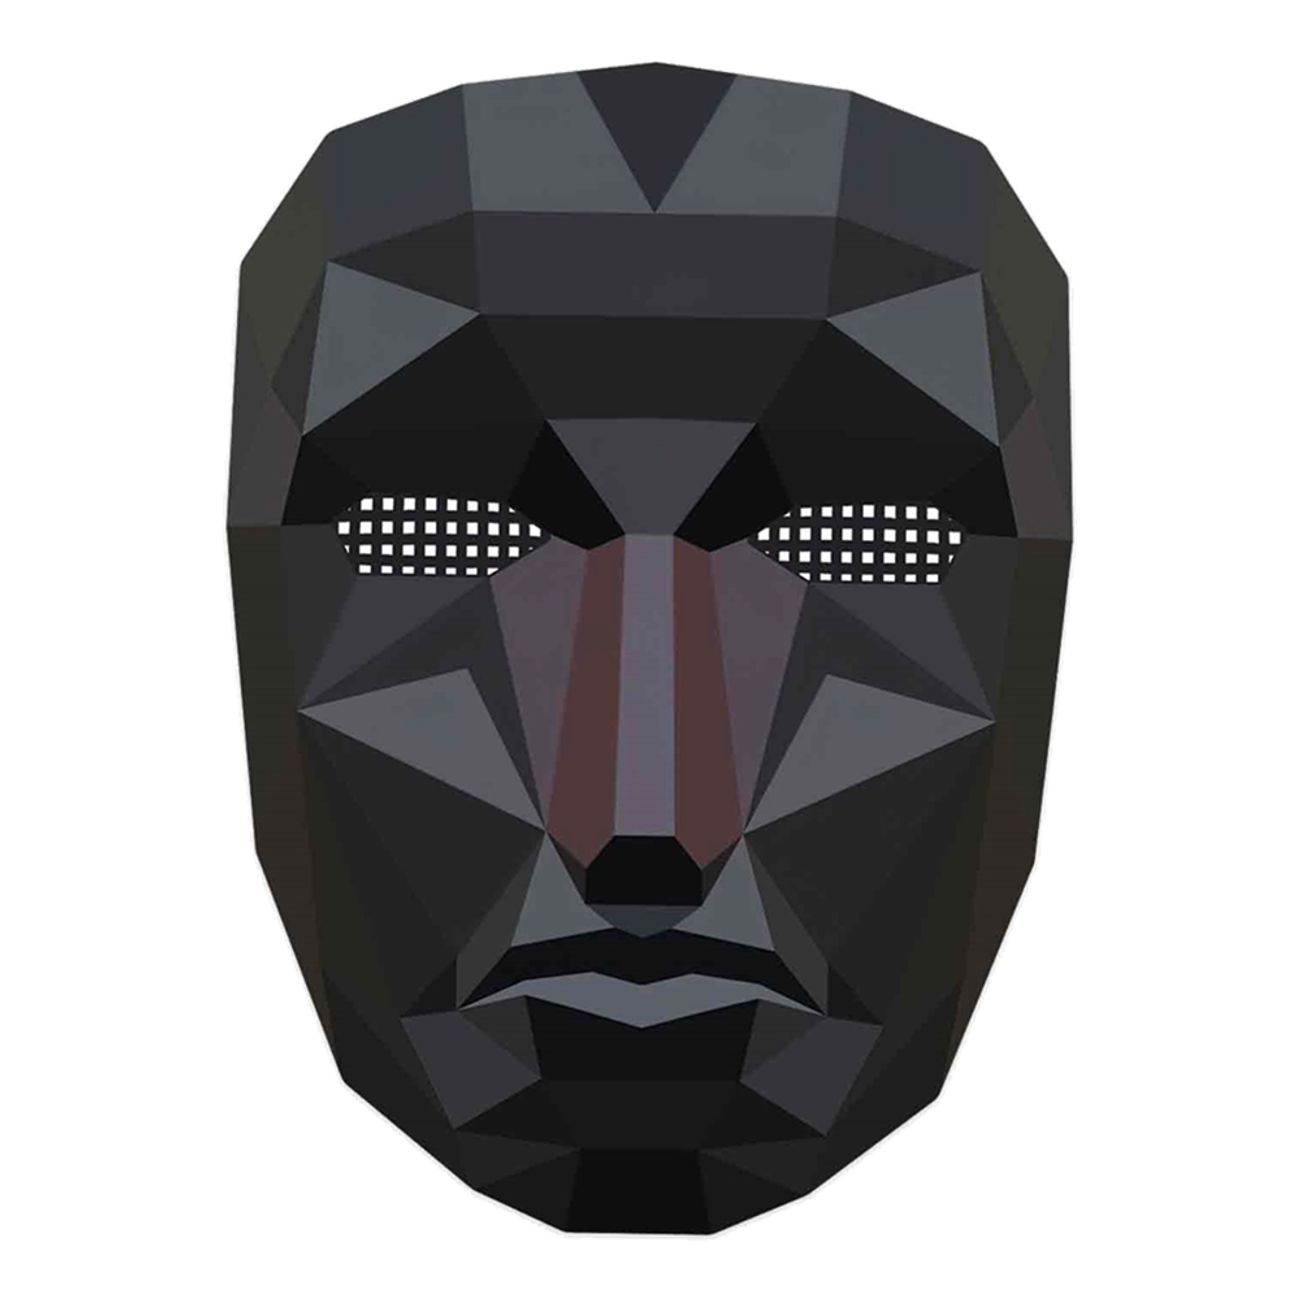 squid-game-pappmask-polygon-81235-1